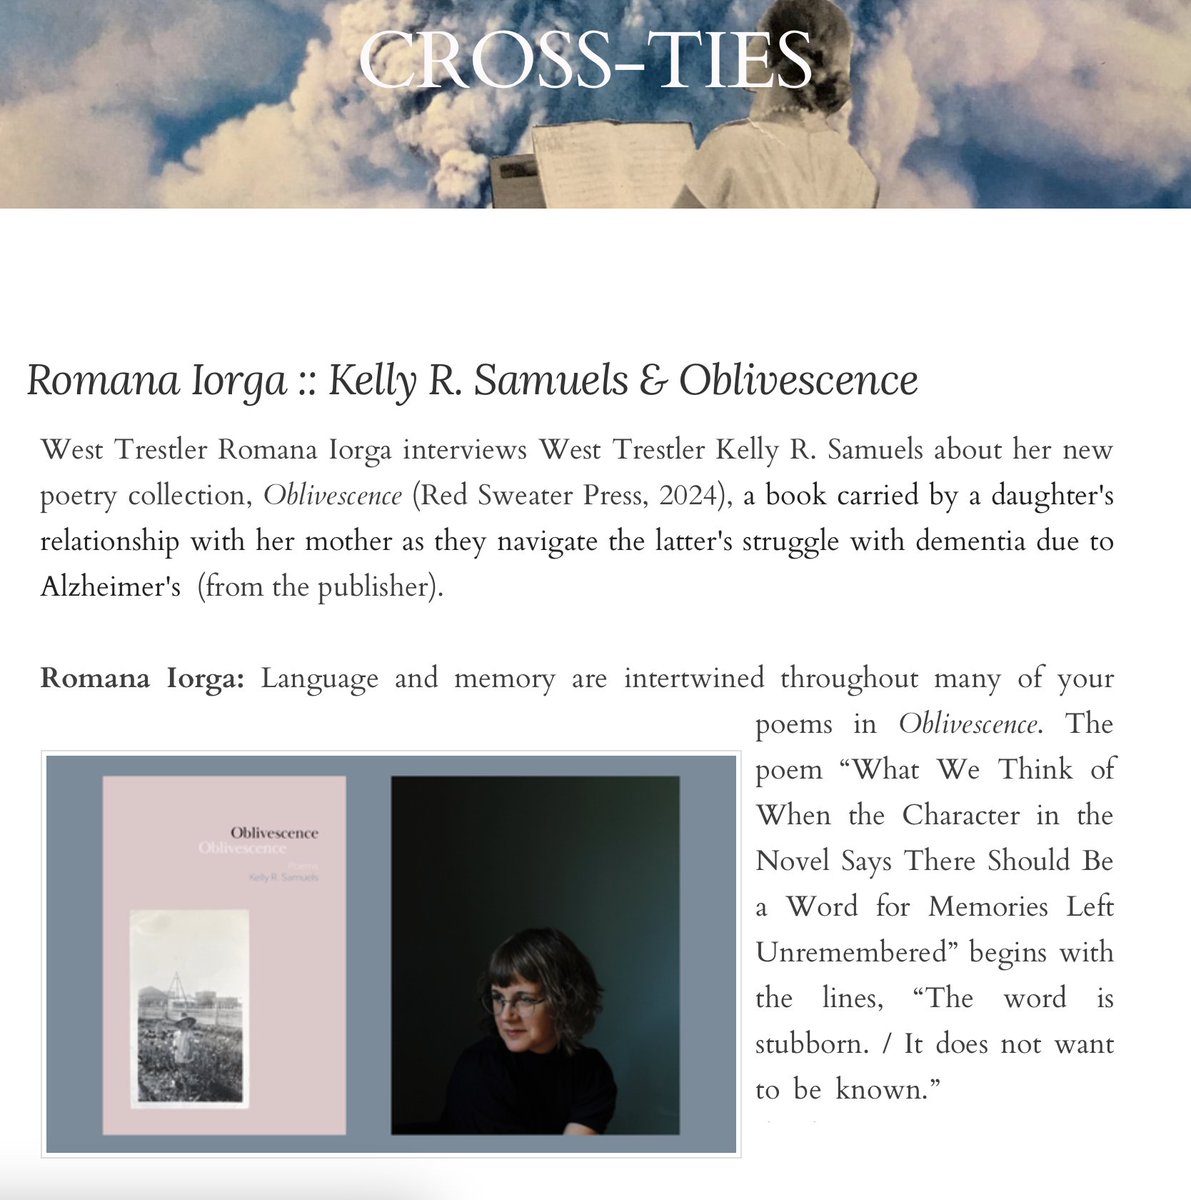 Stop by the @westtrestle review to enjoy our CROSS-TIES where Romana Iorga interviews West Trestler Kelly R. Samuels about her poetry collection OBLIVESCENCE ((Red Sweater Press, 2024) westtrestlereview.com/west_trestle_r…